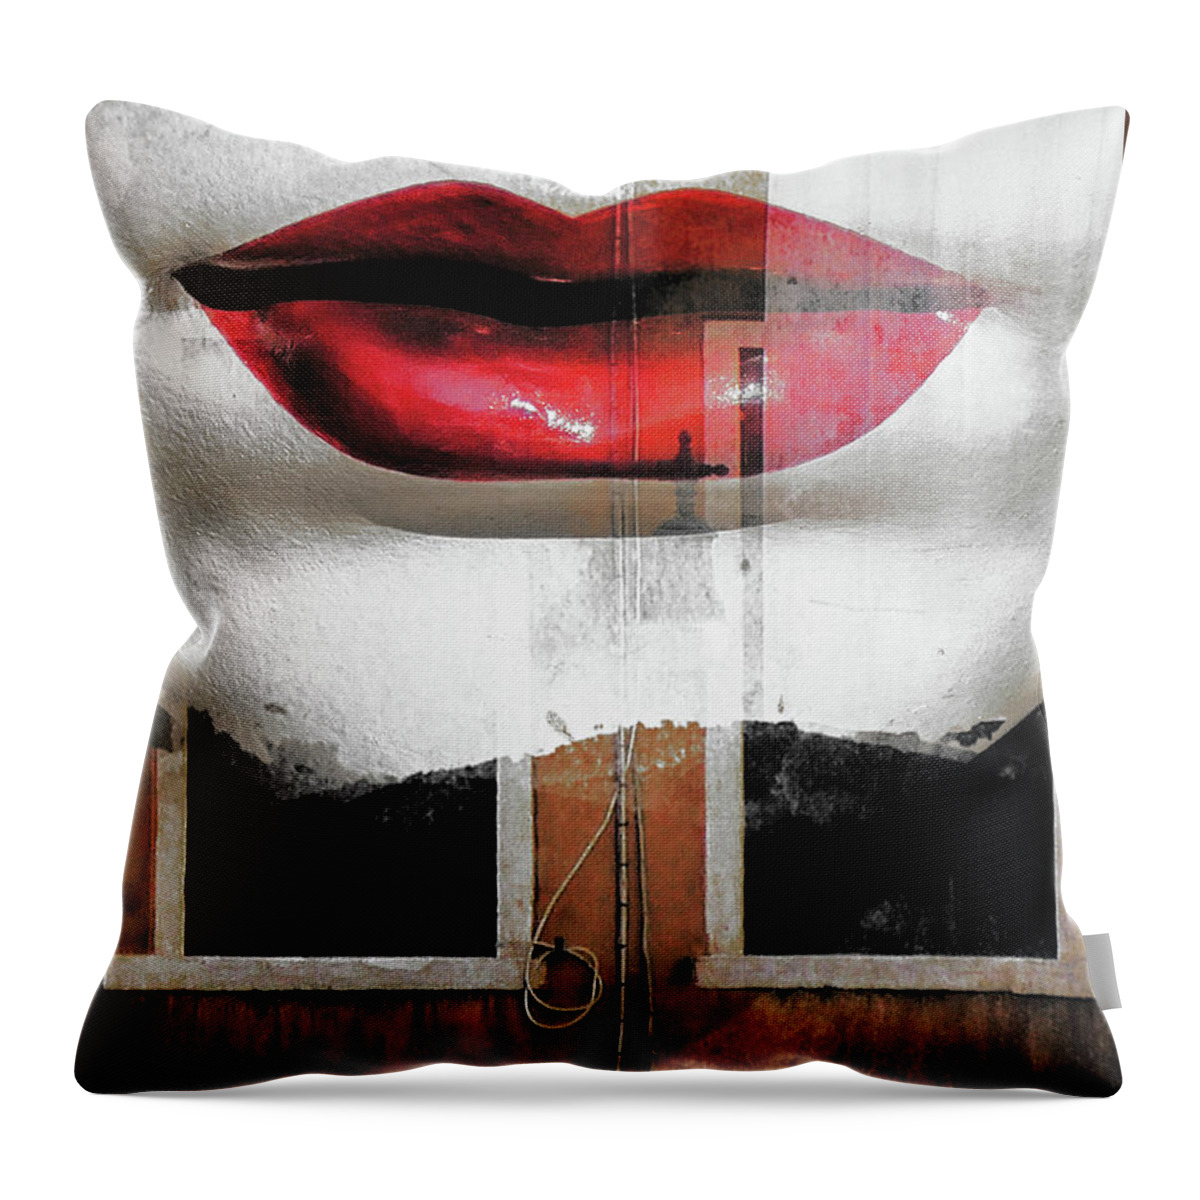 Lips Throw Pillow featuring the photograph Red lips and old windows by Gabi Hampe